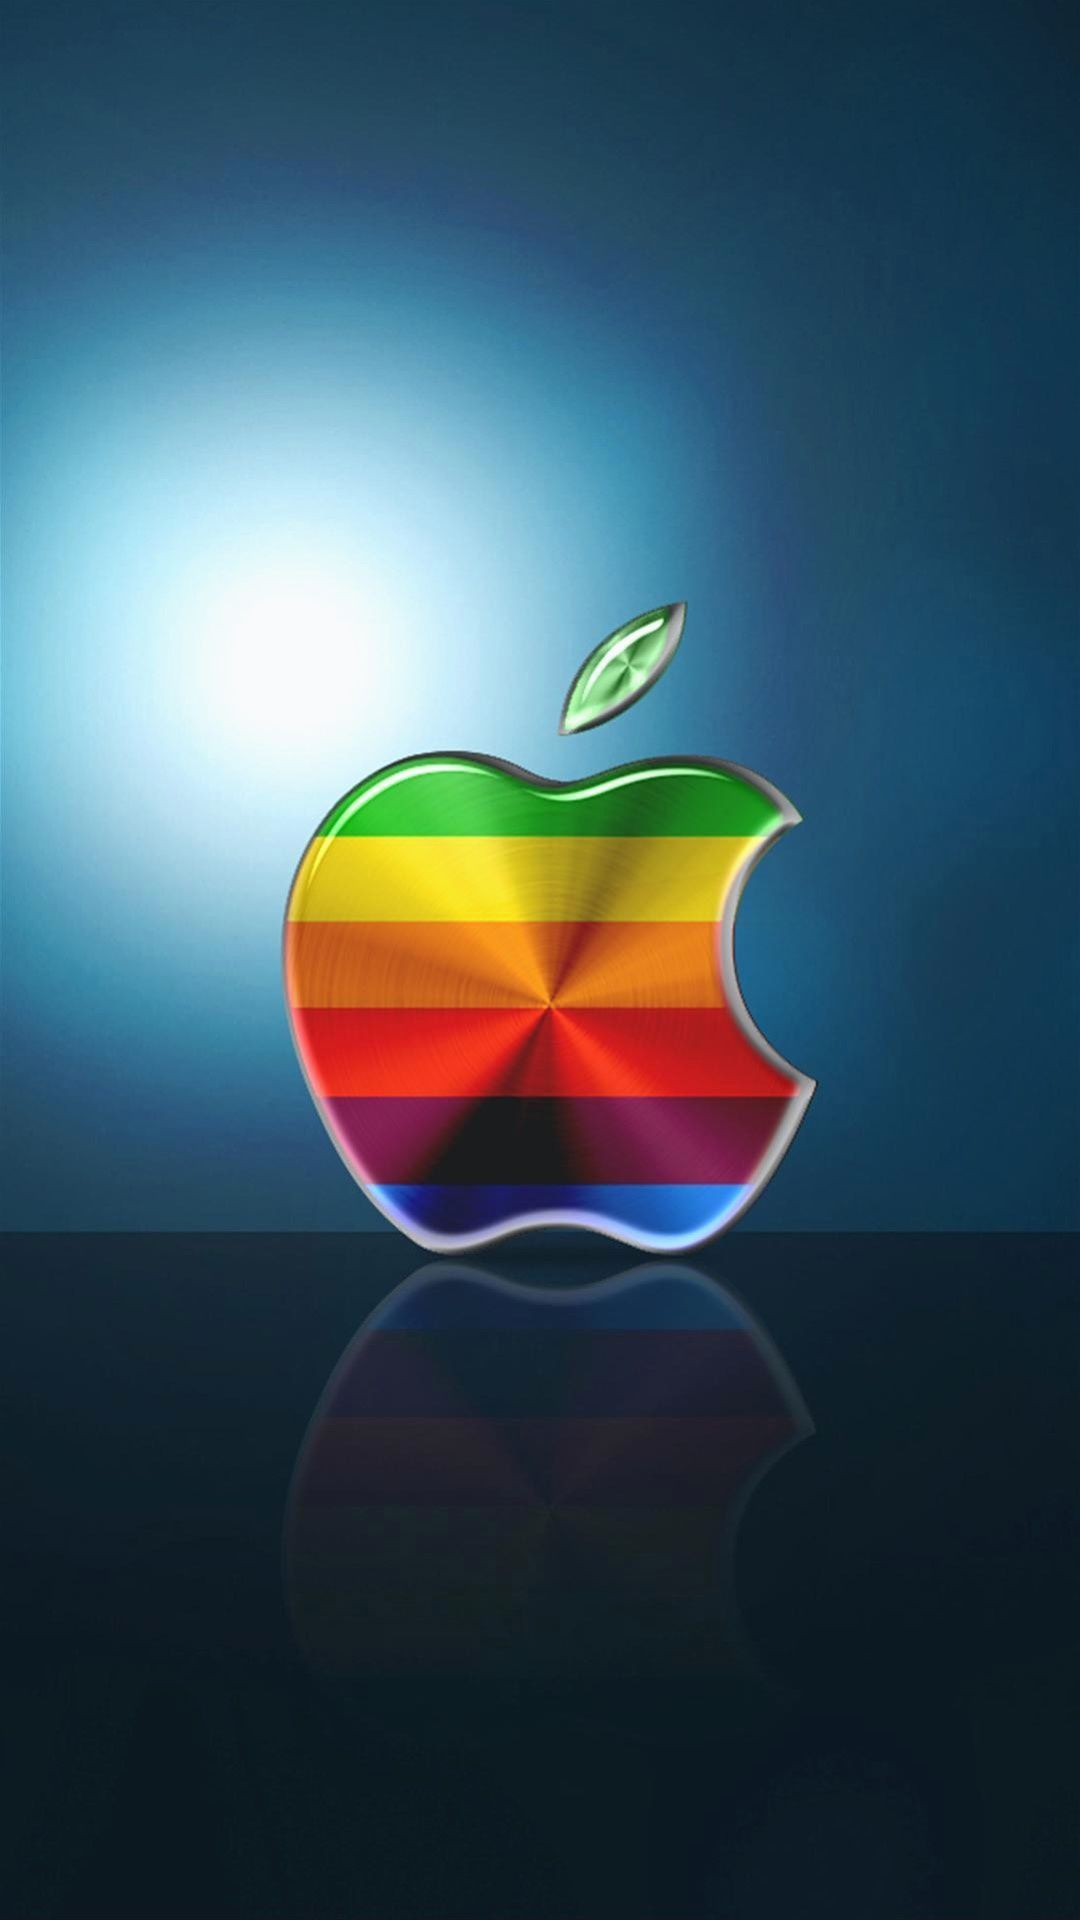 Mobile wallpaper: Brands, Apple, Logos, 5124 download the picture for free.